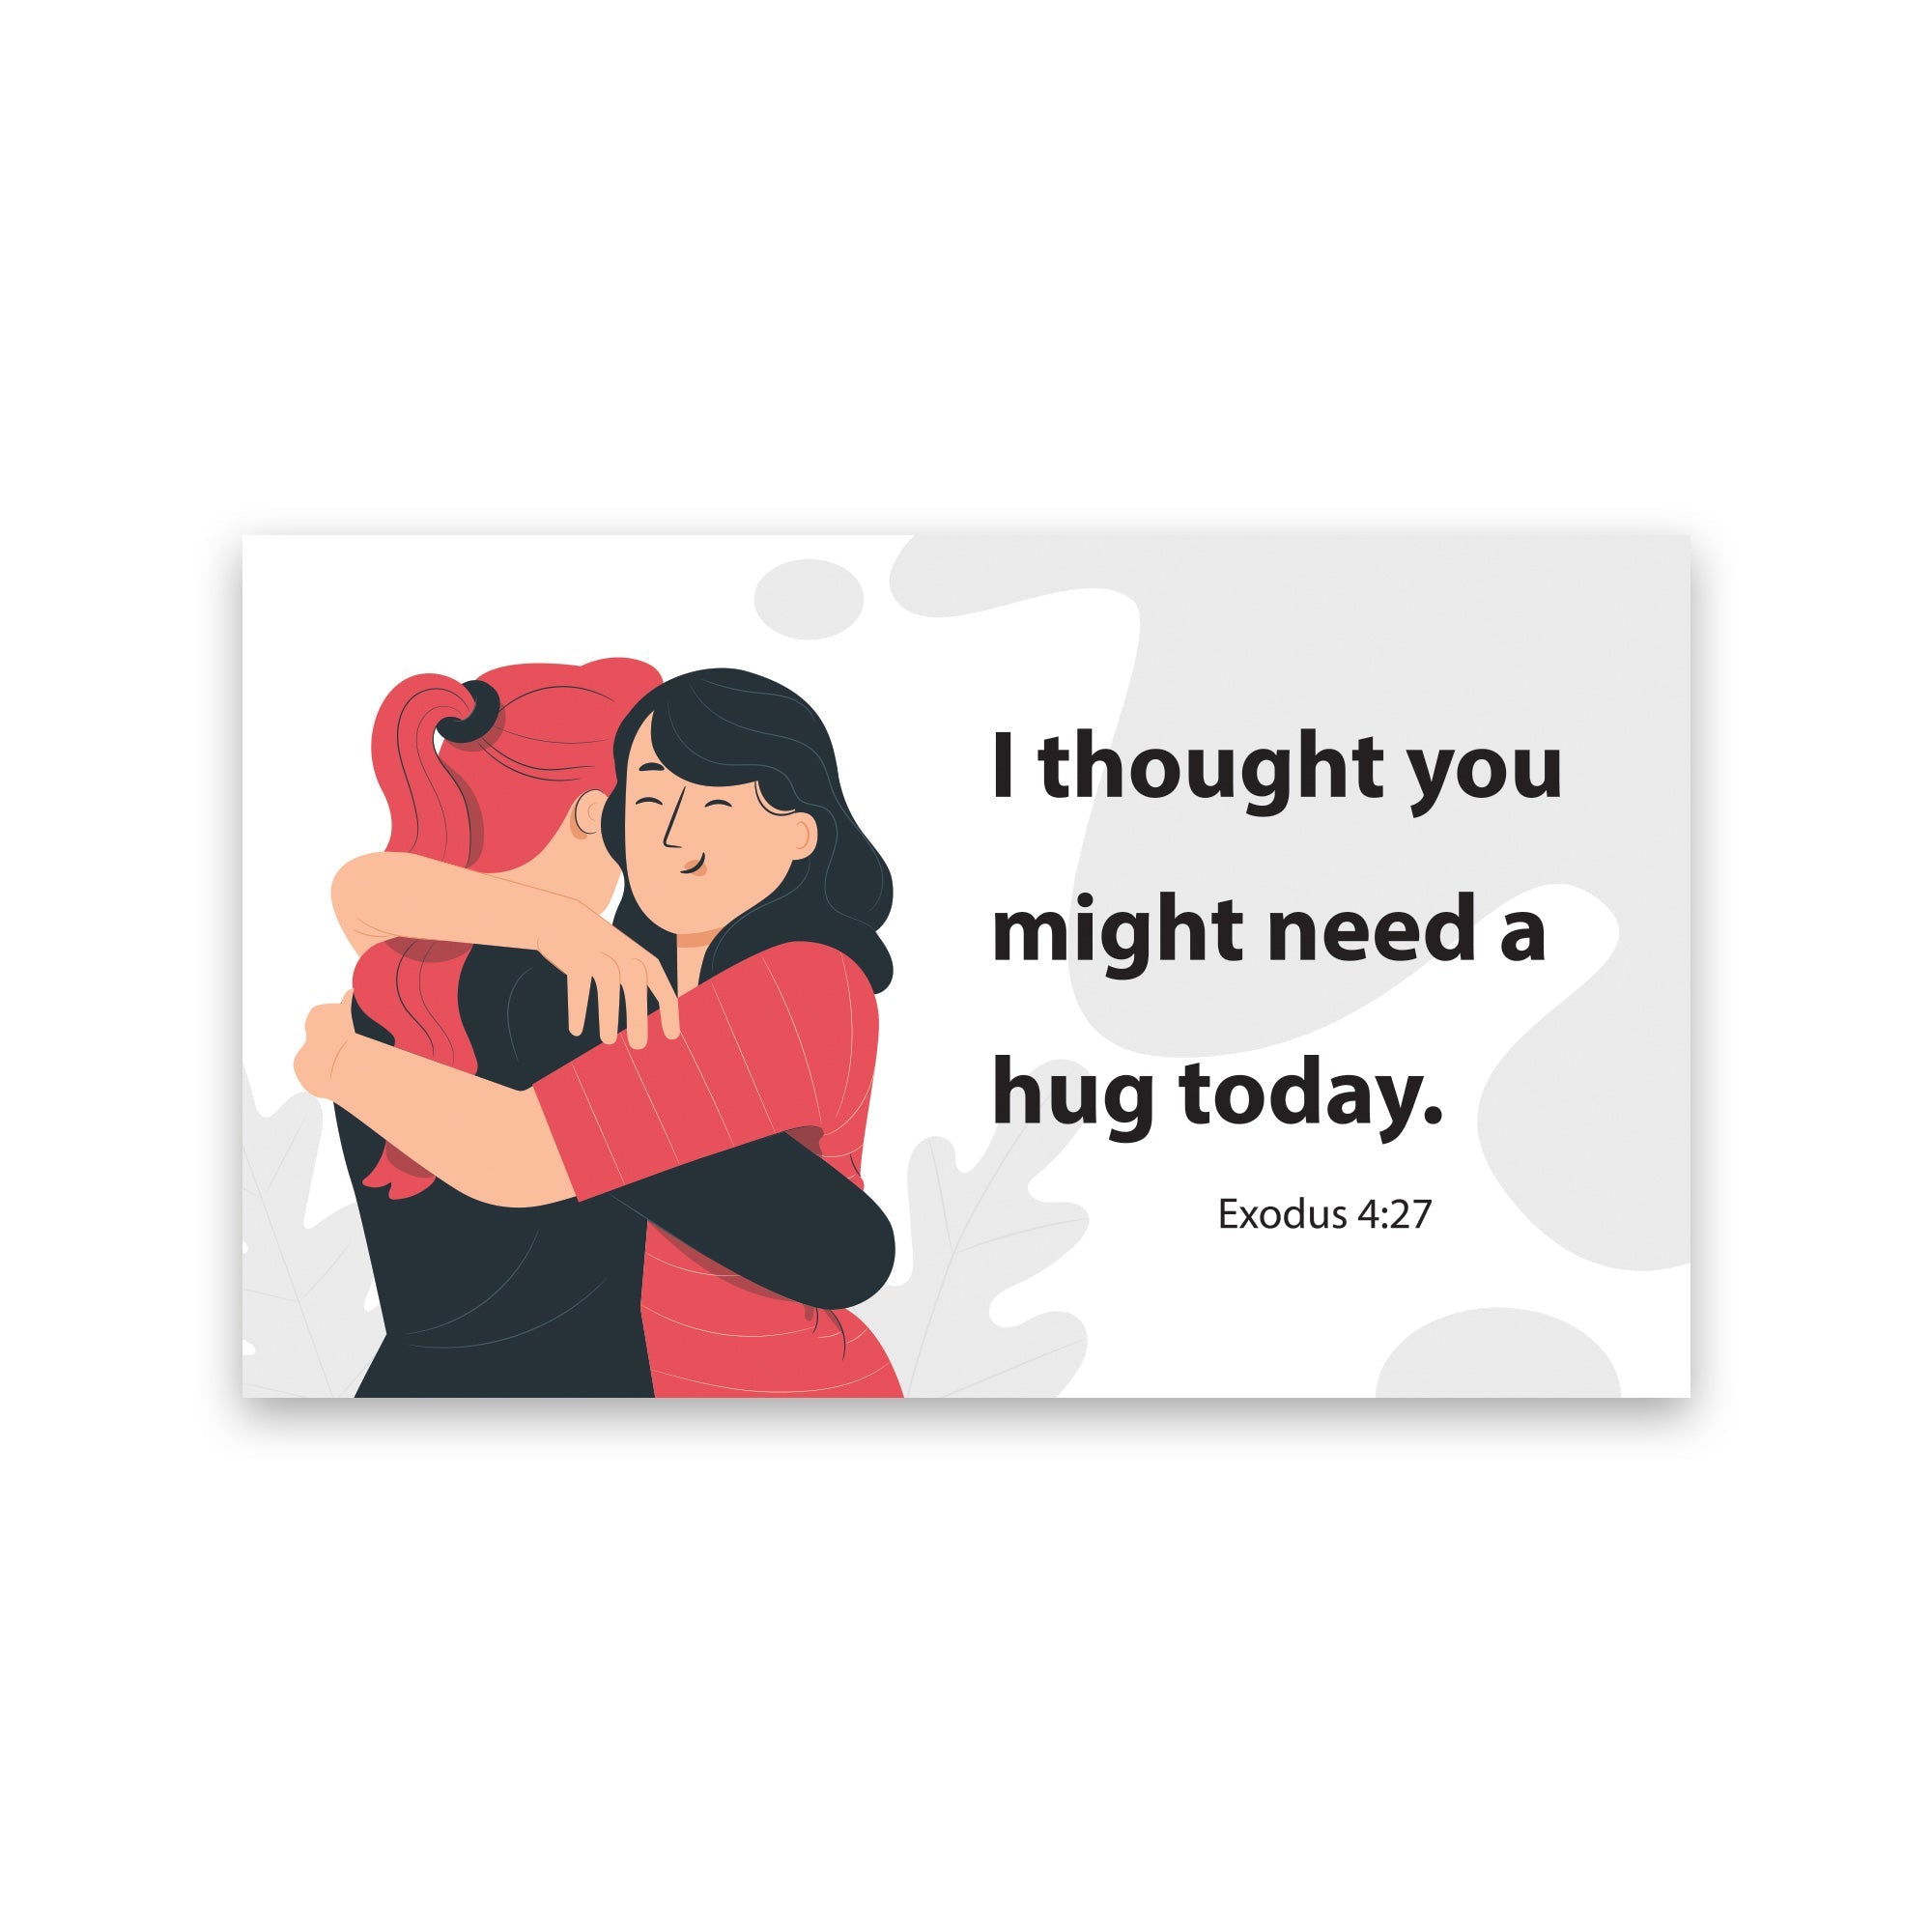 I thought you might need a hug today, Exodus 4:27, Pass Along Scripture Cards, Pack of 25